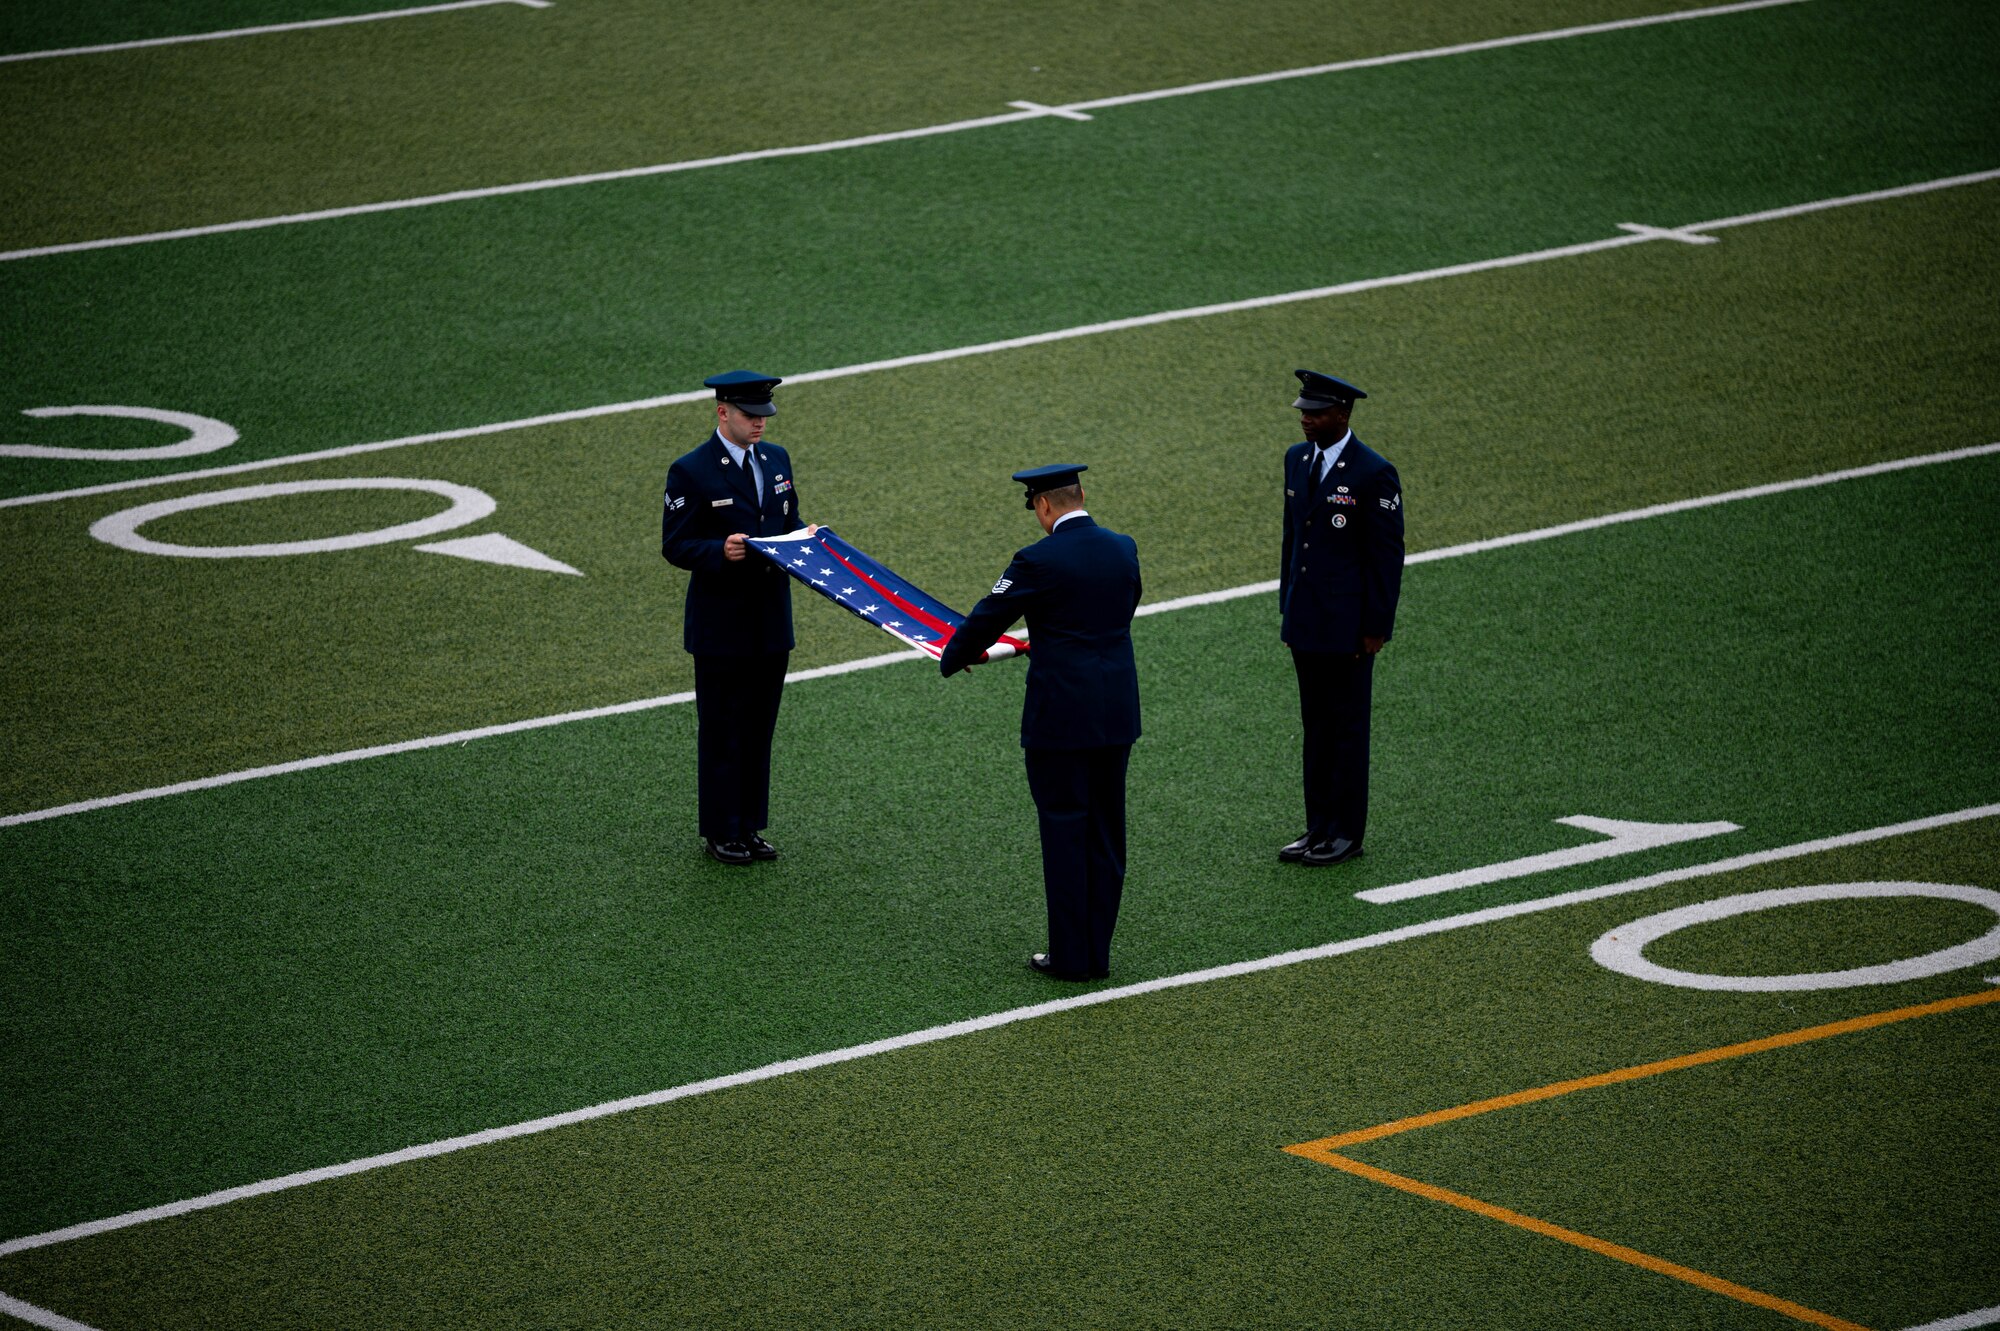 51st Fighter Wing honor guardsmen, fold a U.S. flag before a memorial ruck march